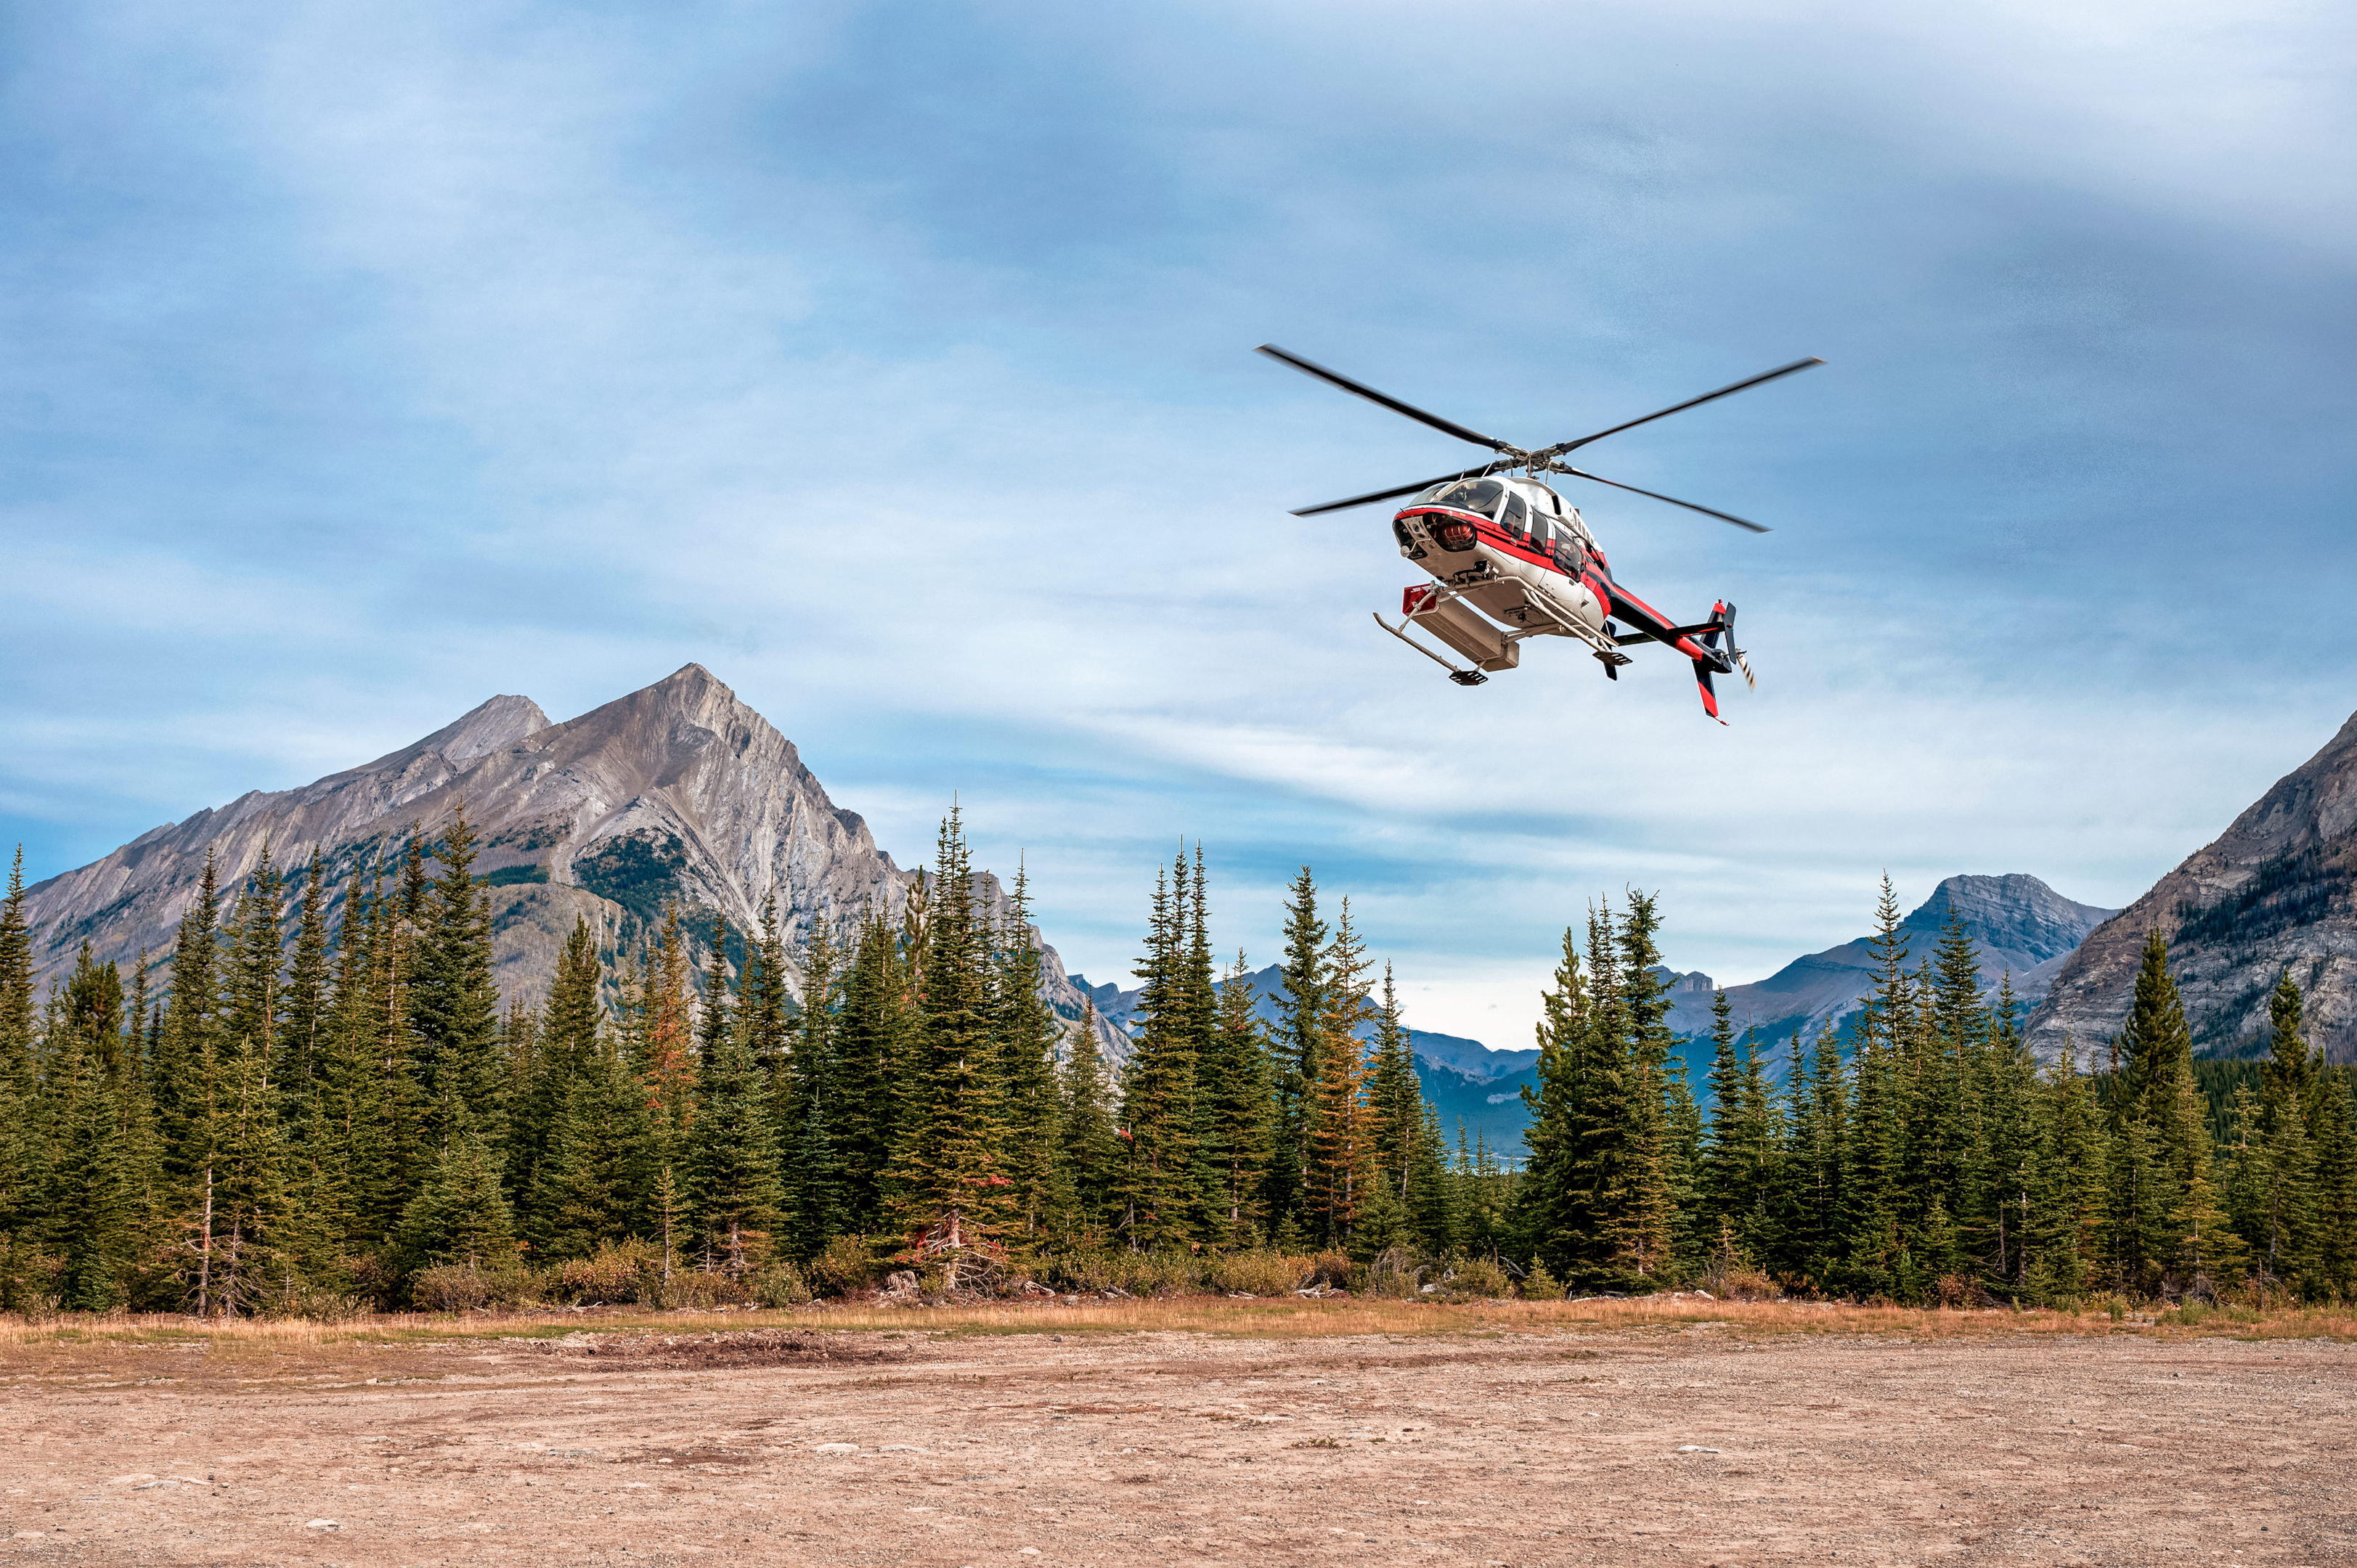 A helicopter elopement